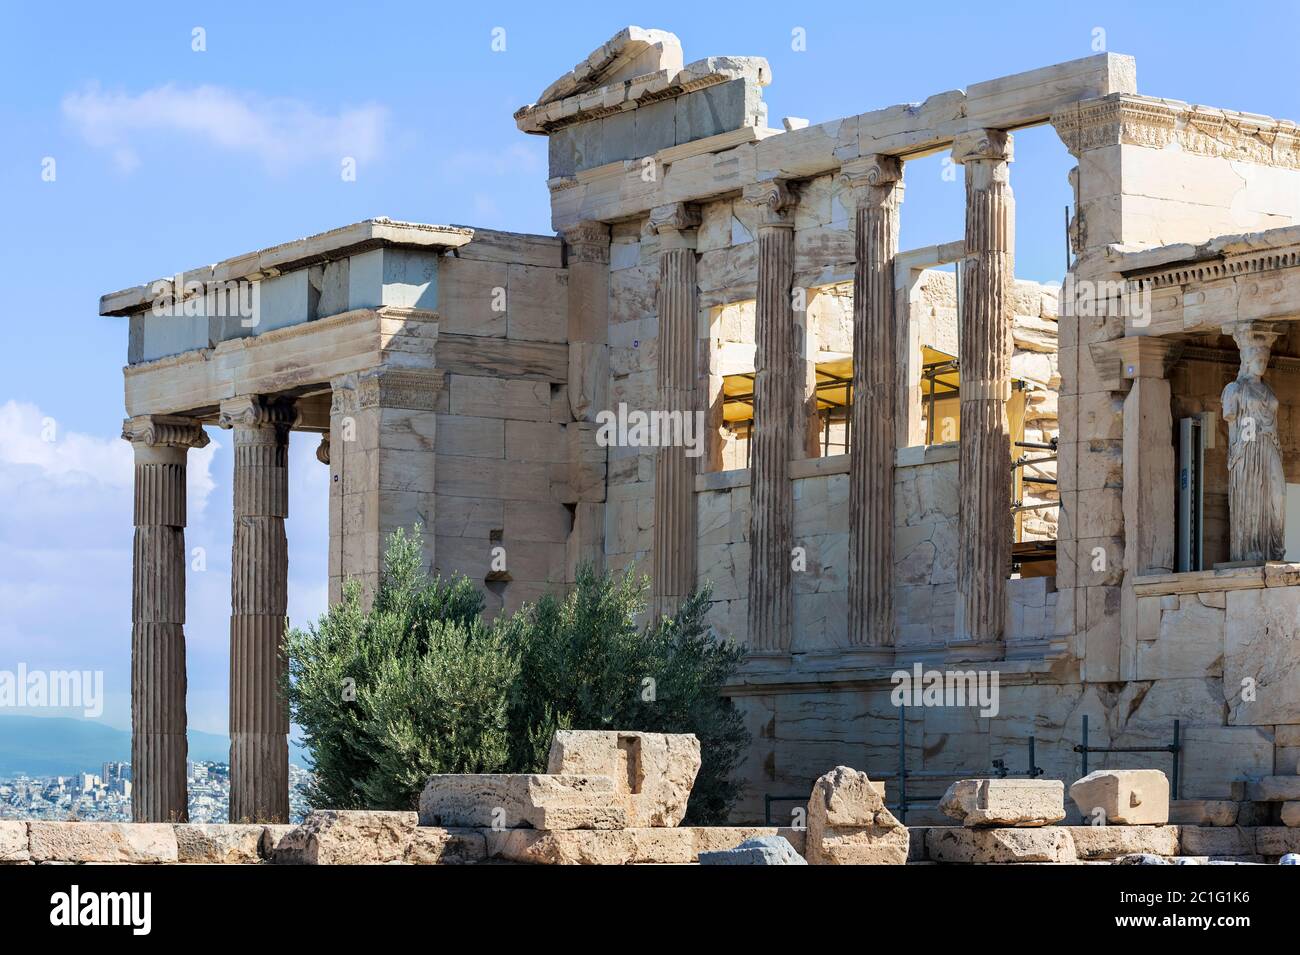 The caryatid statue and the columns of Erechtheion temple on Acropolis Hill, Athens Greece. Stock Photo